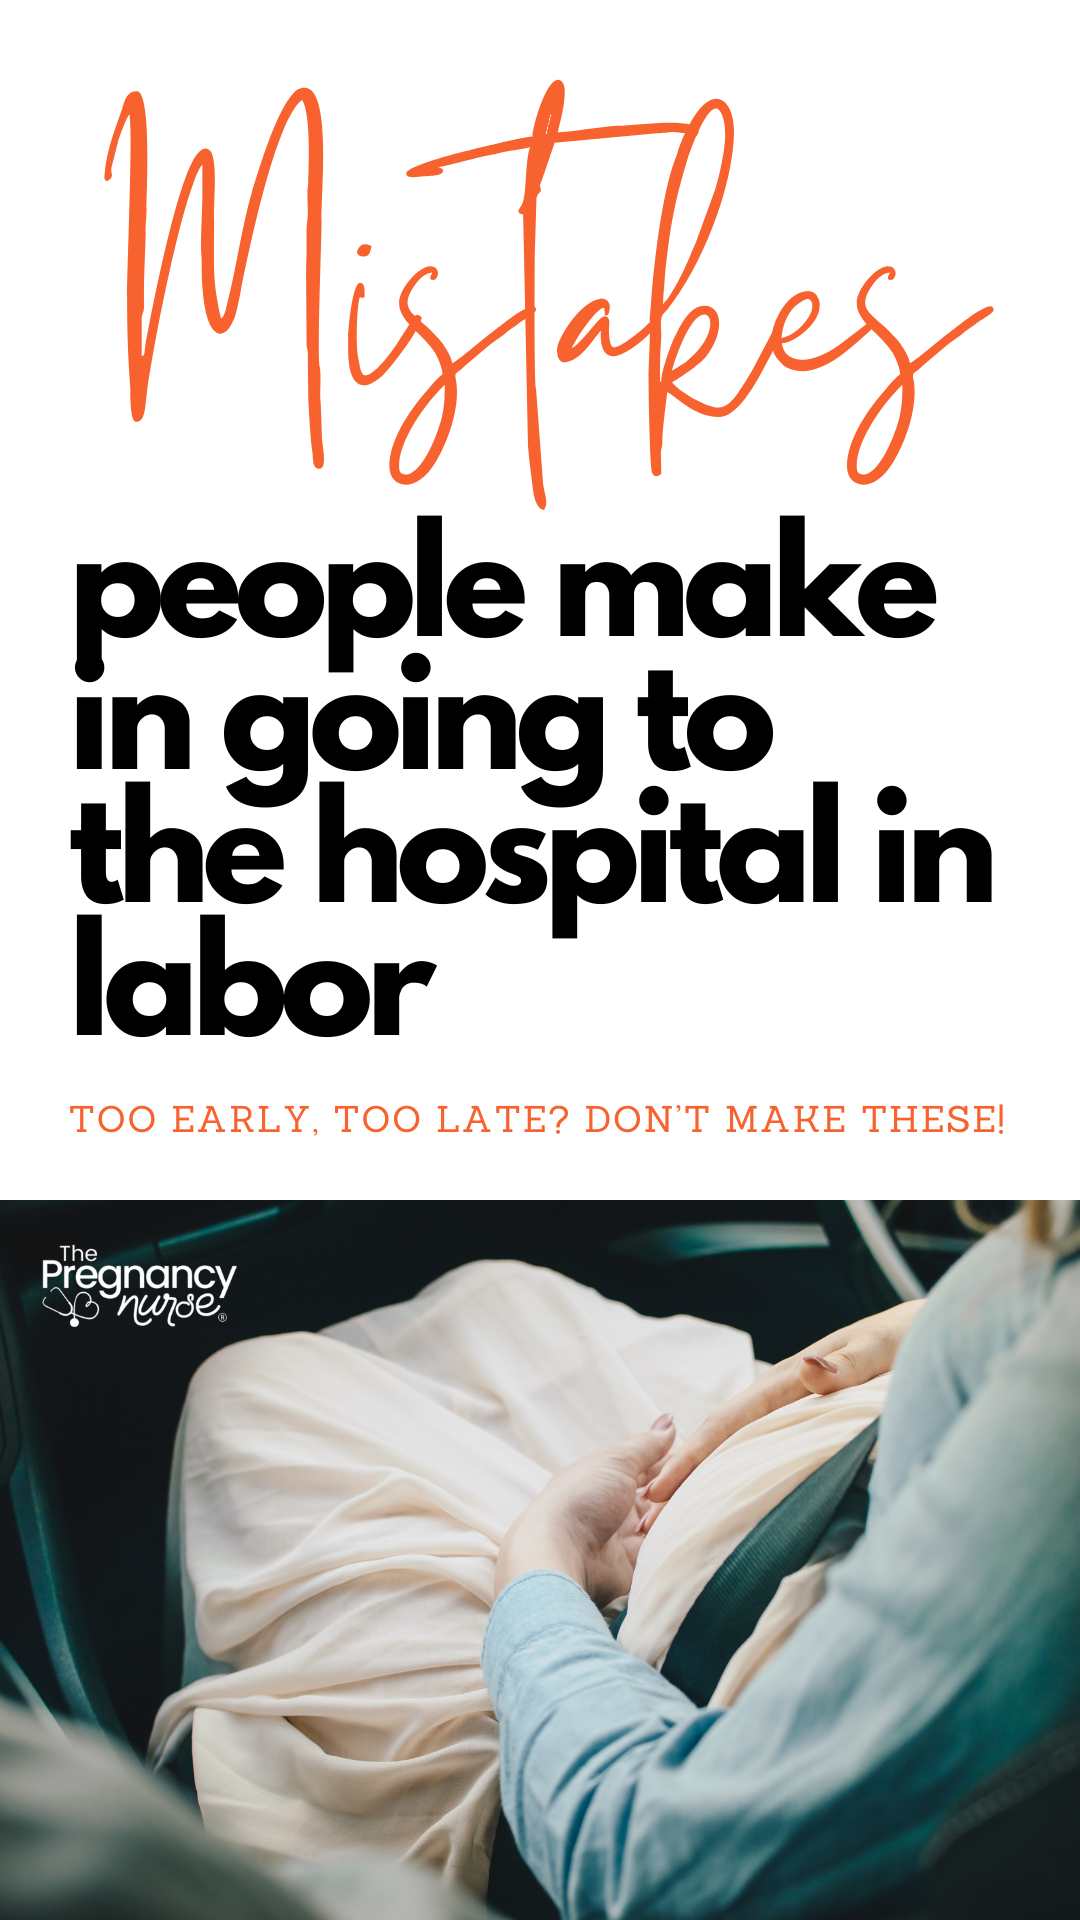 mistakes people make in going to the hospital in labor (don't get there too early or too late). Pregnant woman in a car with seatbelt on.